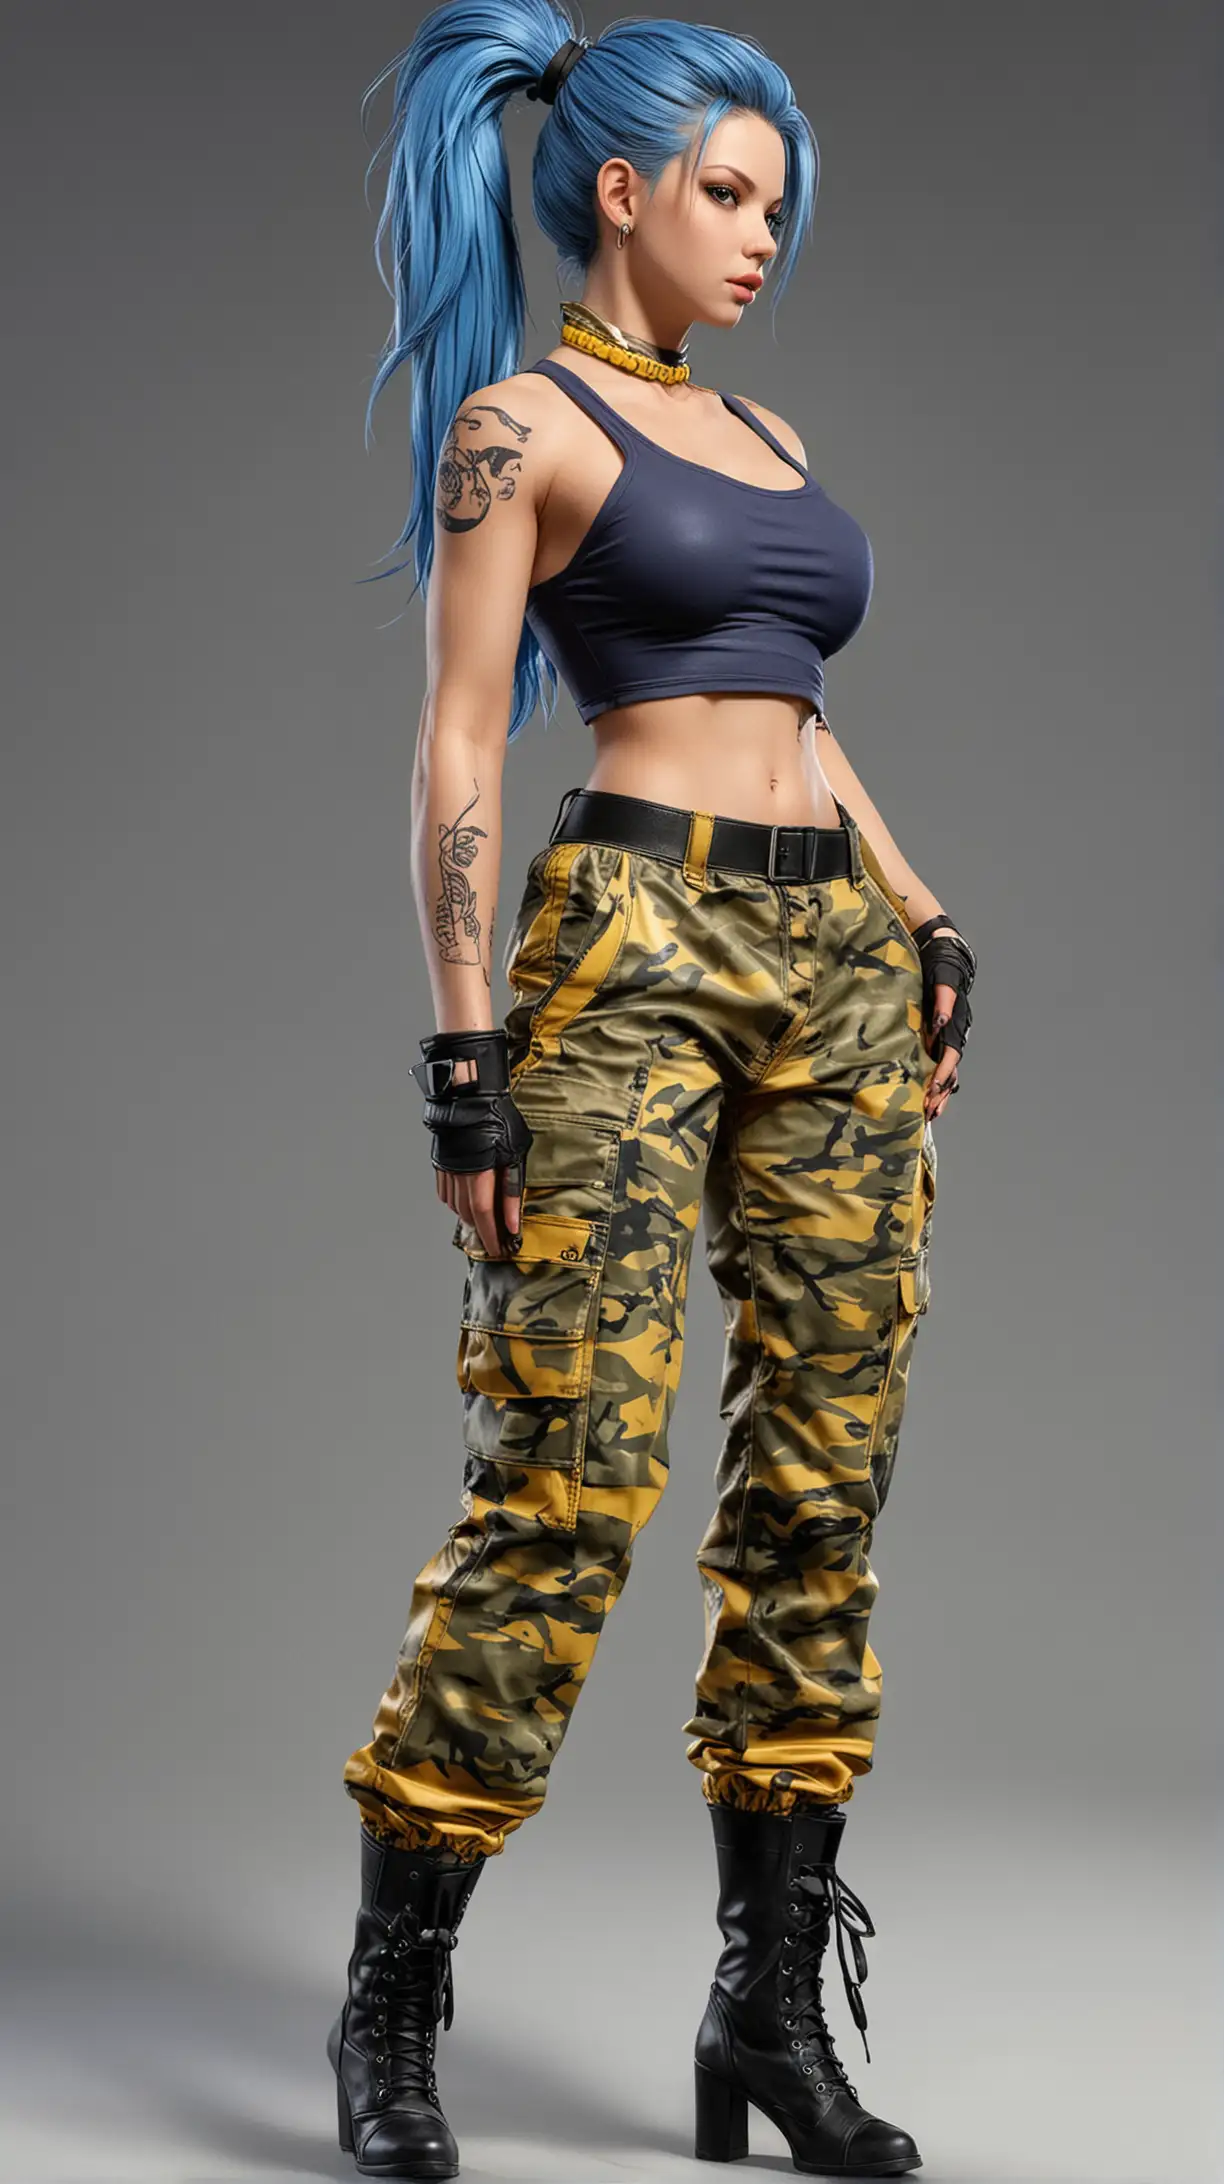 The king of fighters
Female Soldier
Blue Ponytail Hairstyle
Yellow Tube Top
Camouflage Pants